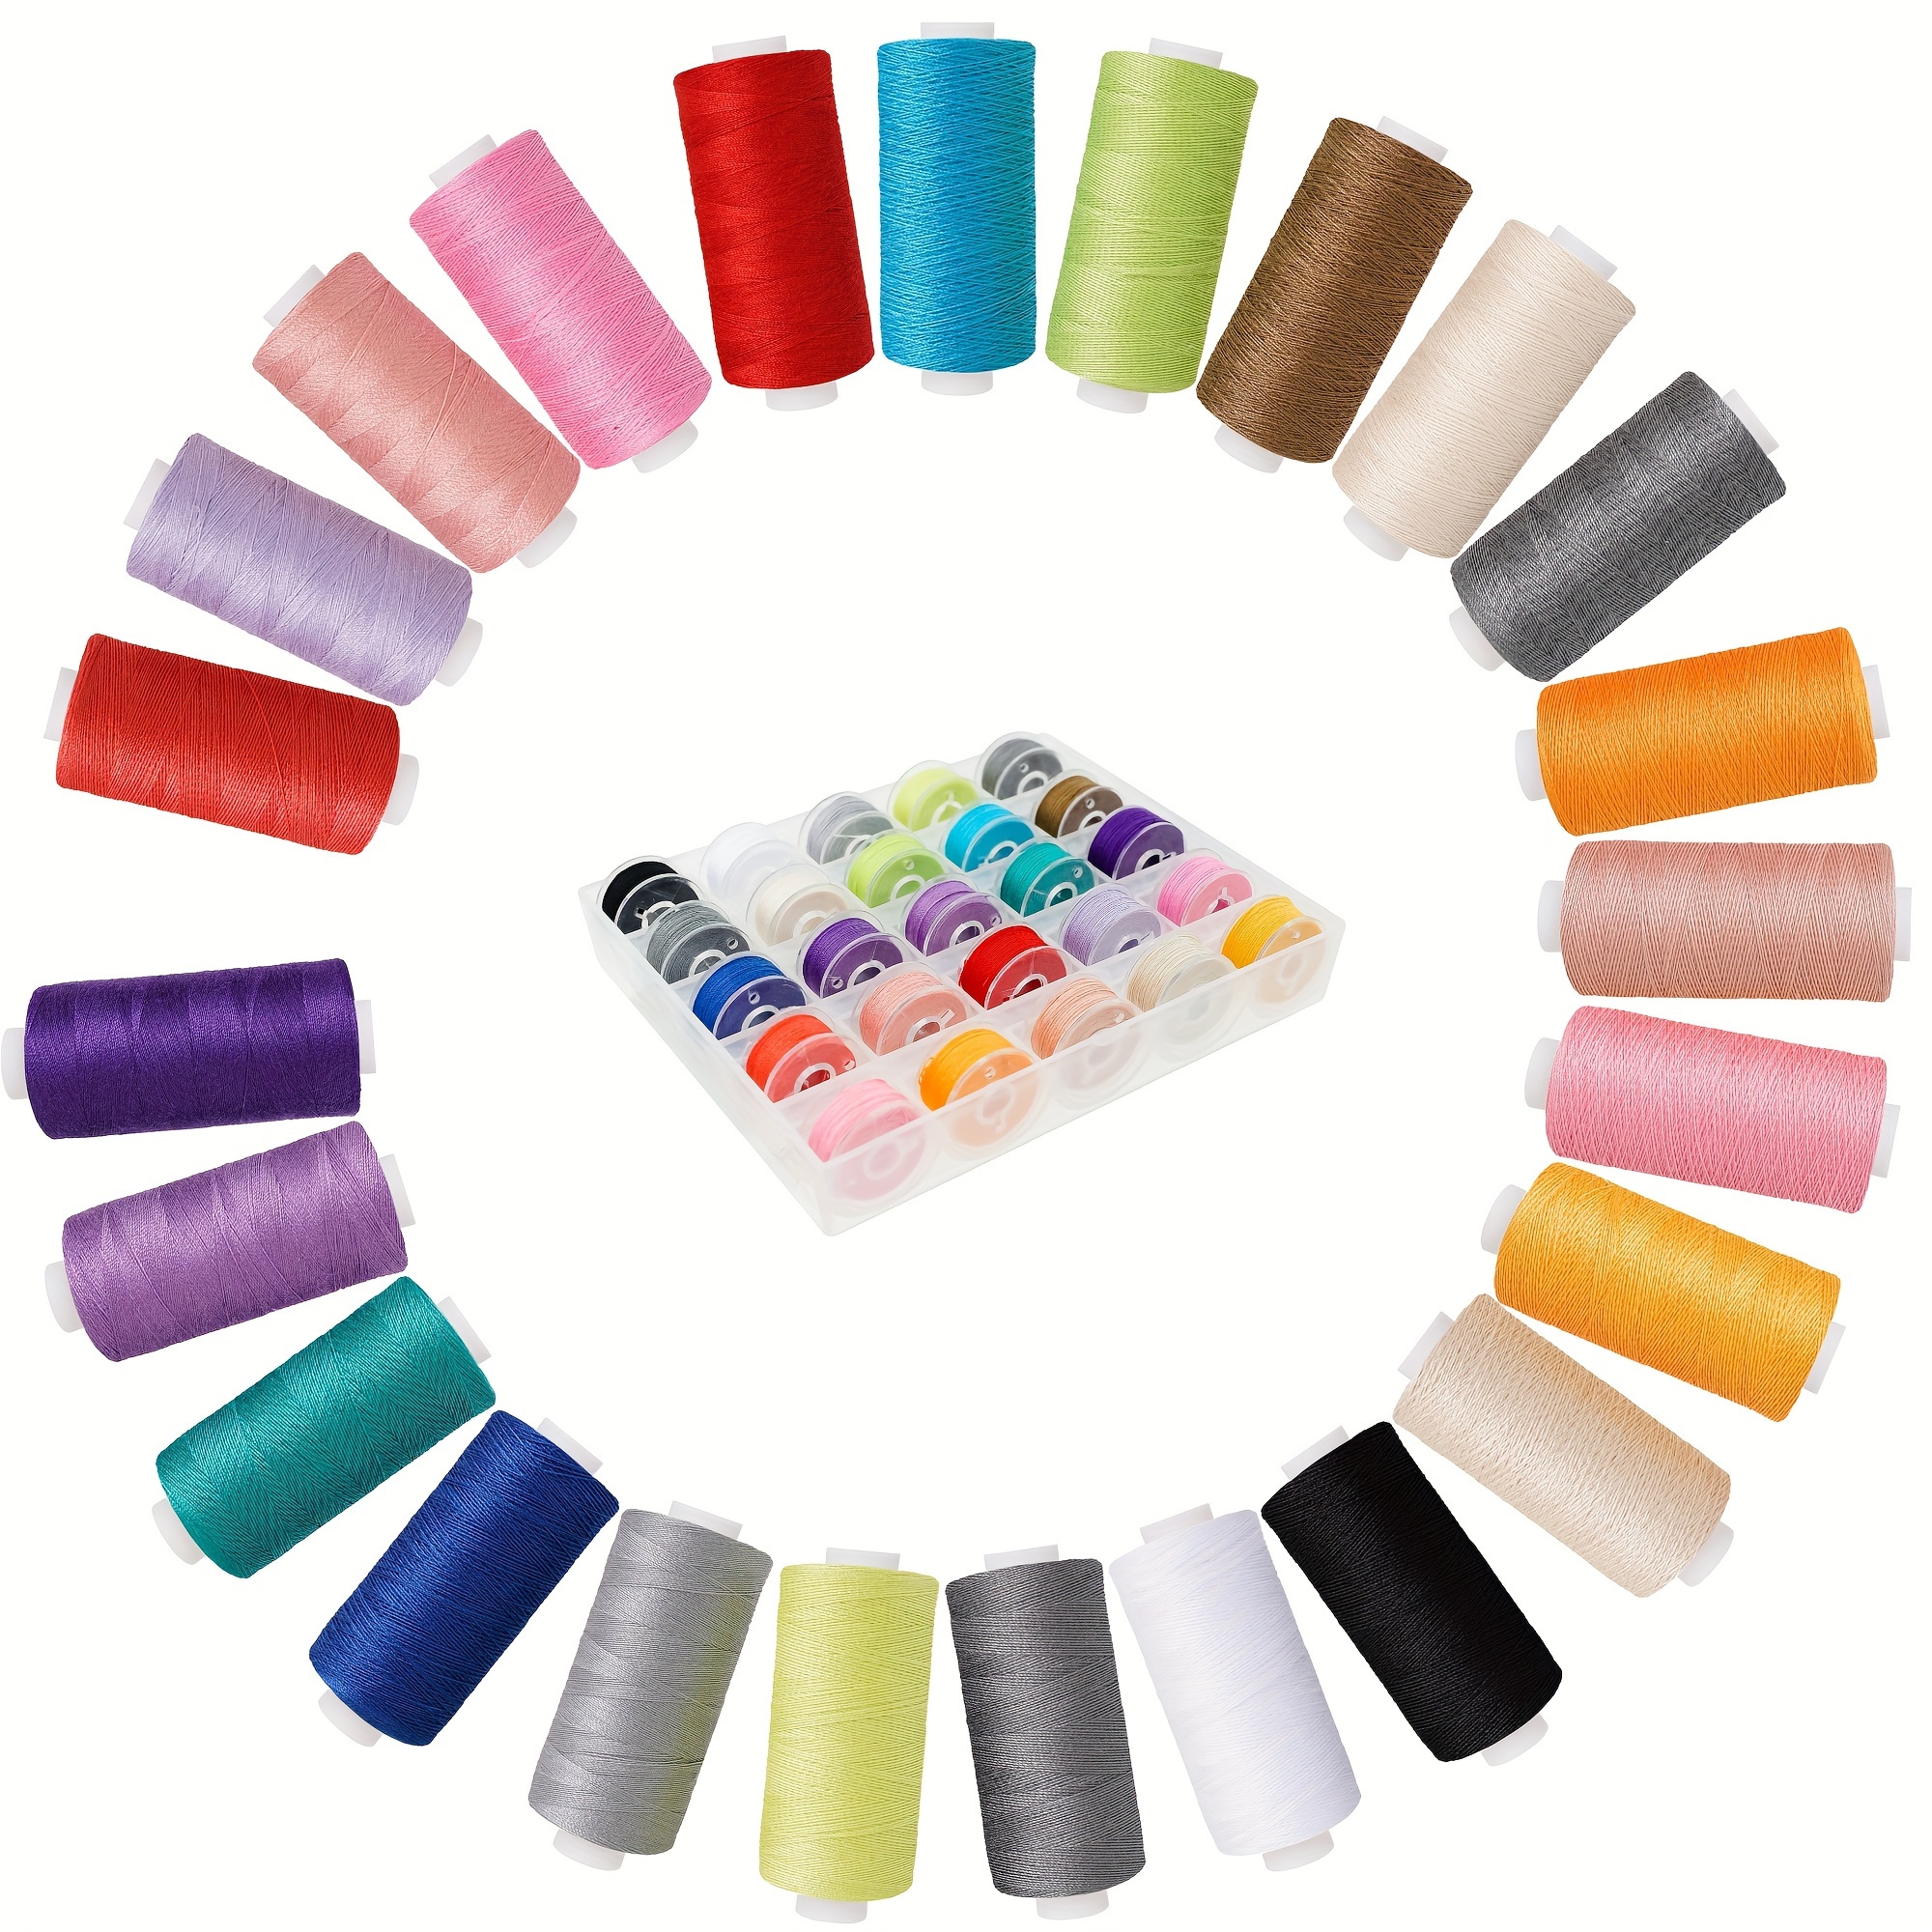 

Bobbin Sewing Thread Kit Includes 25colors 500 Yards Thread And 25pcs Same Color Prewound Bobbins With Storage Box Portable Sewing Machine Bag